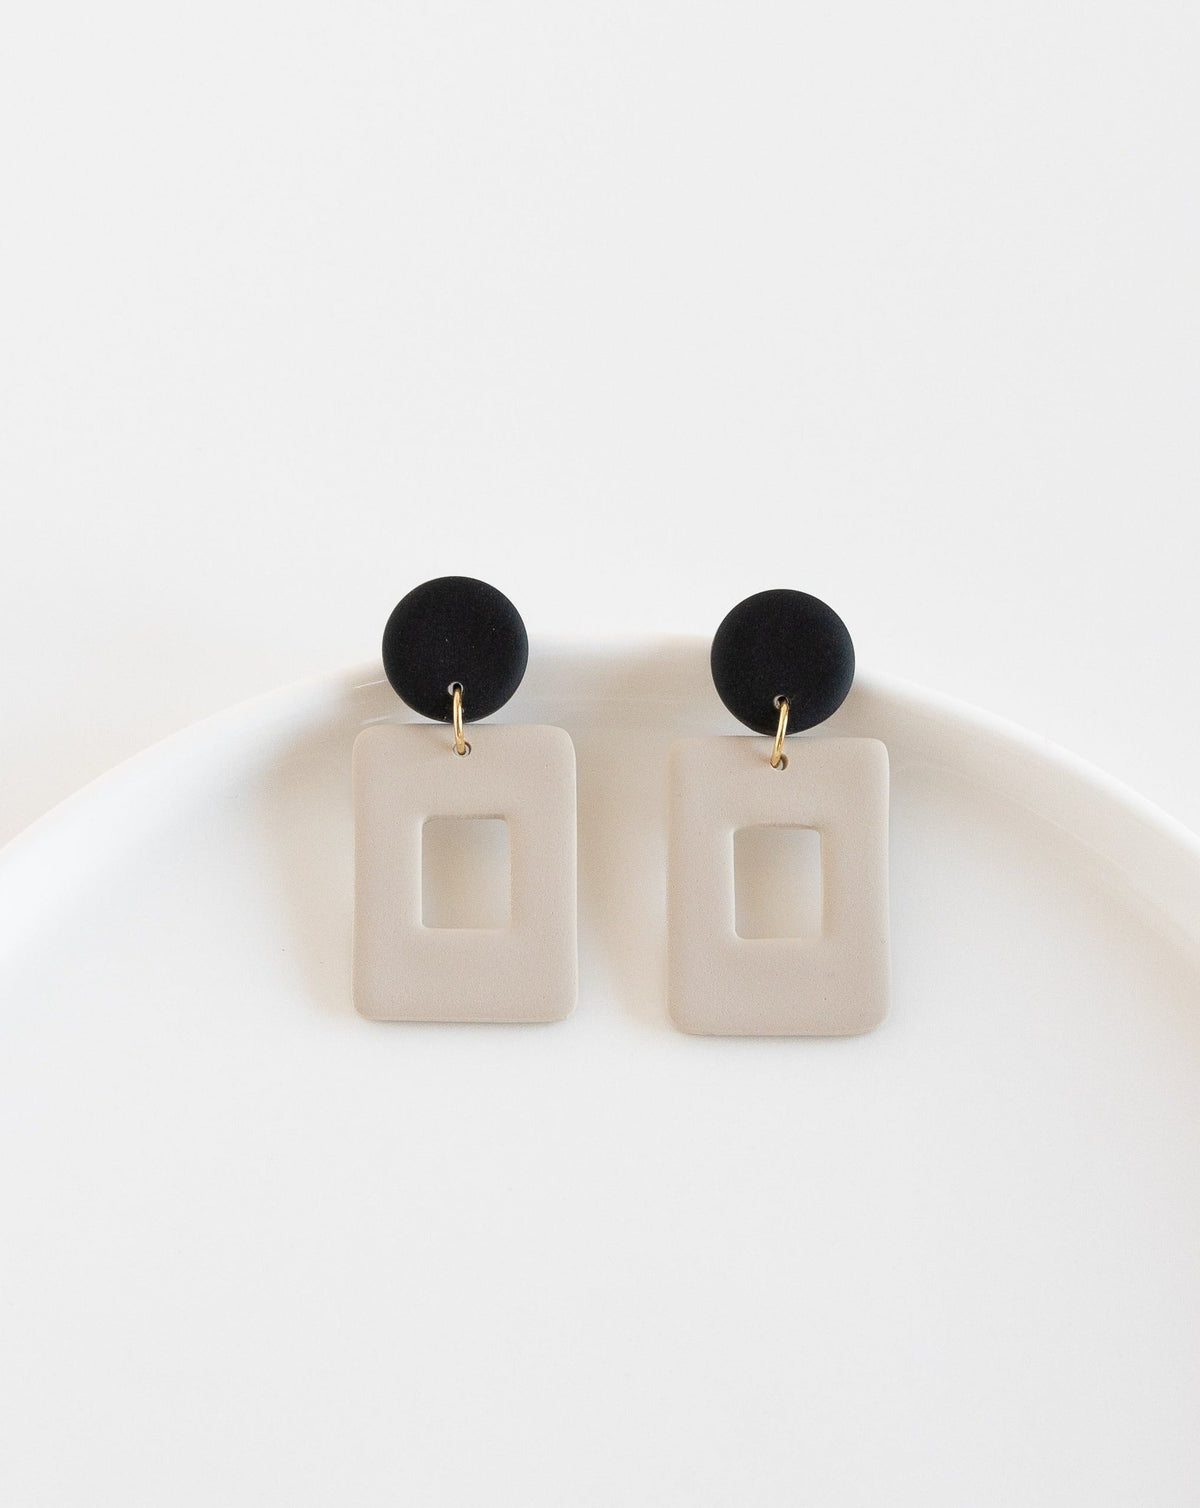 Muna earrings in Beige color, front view